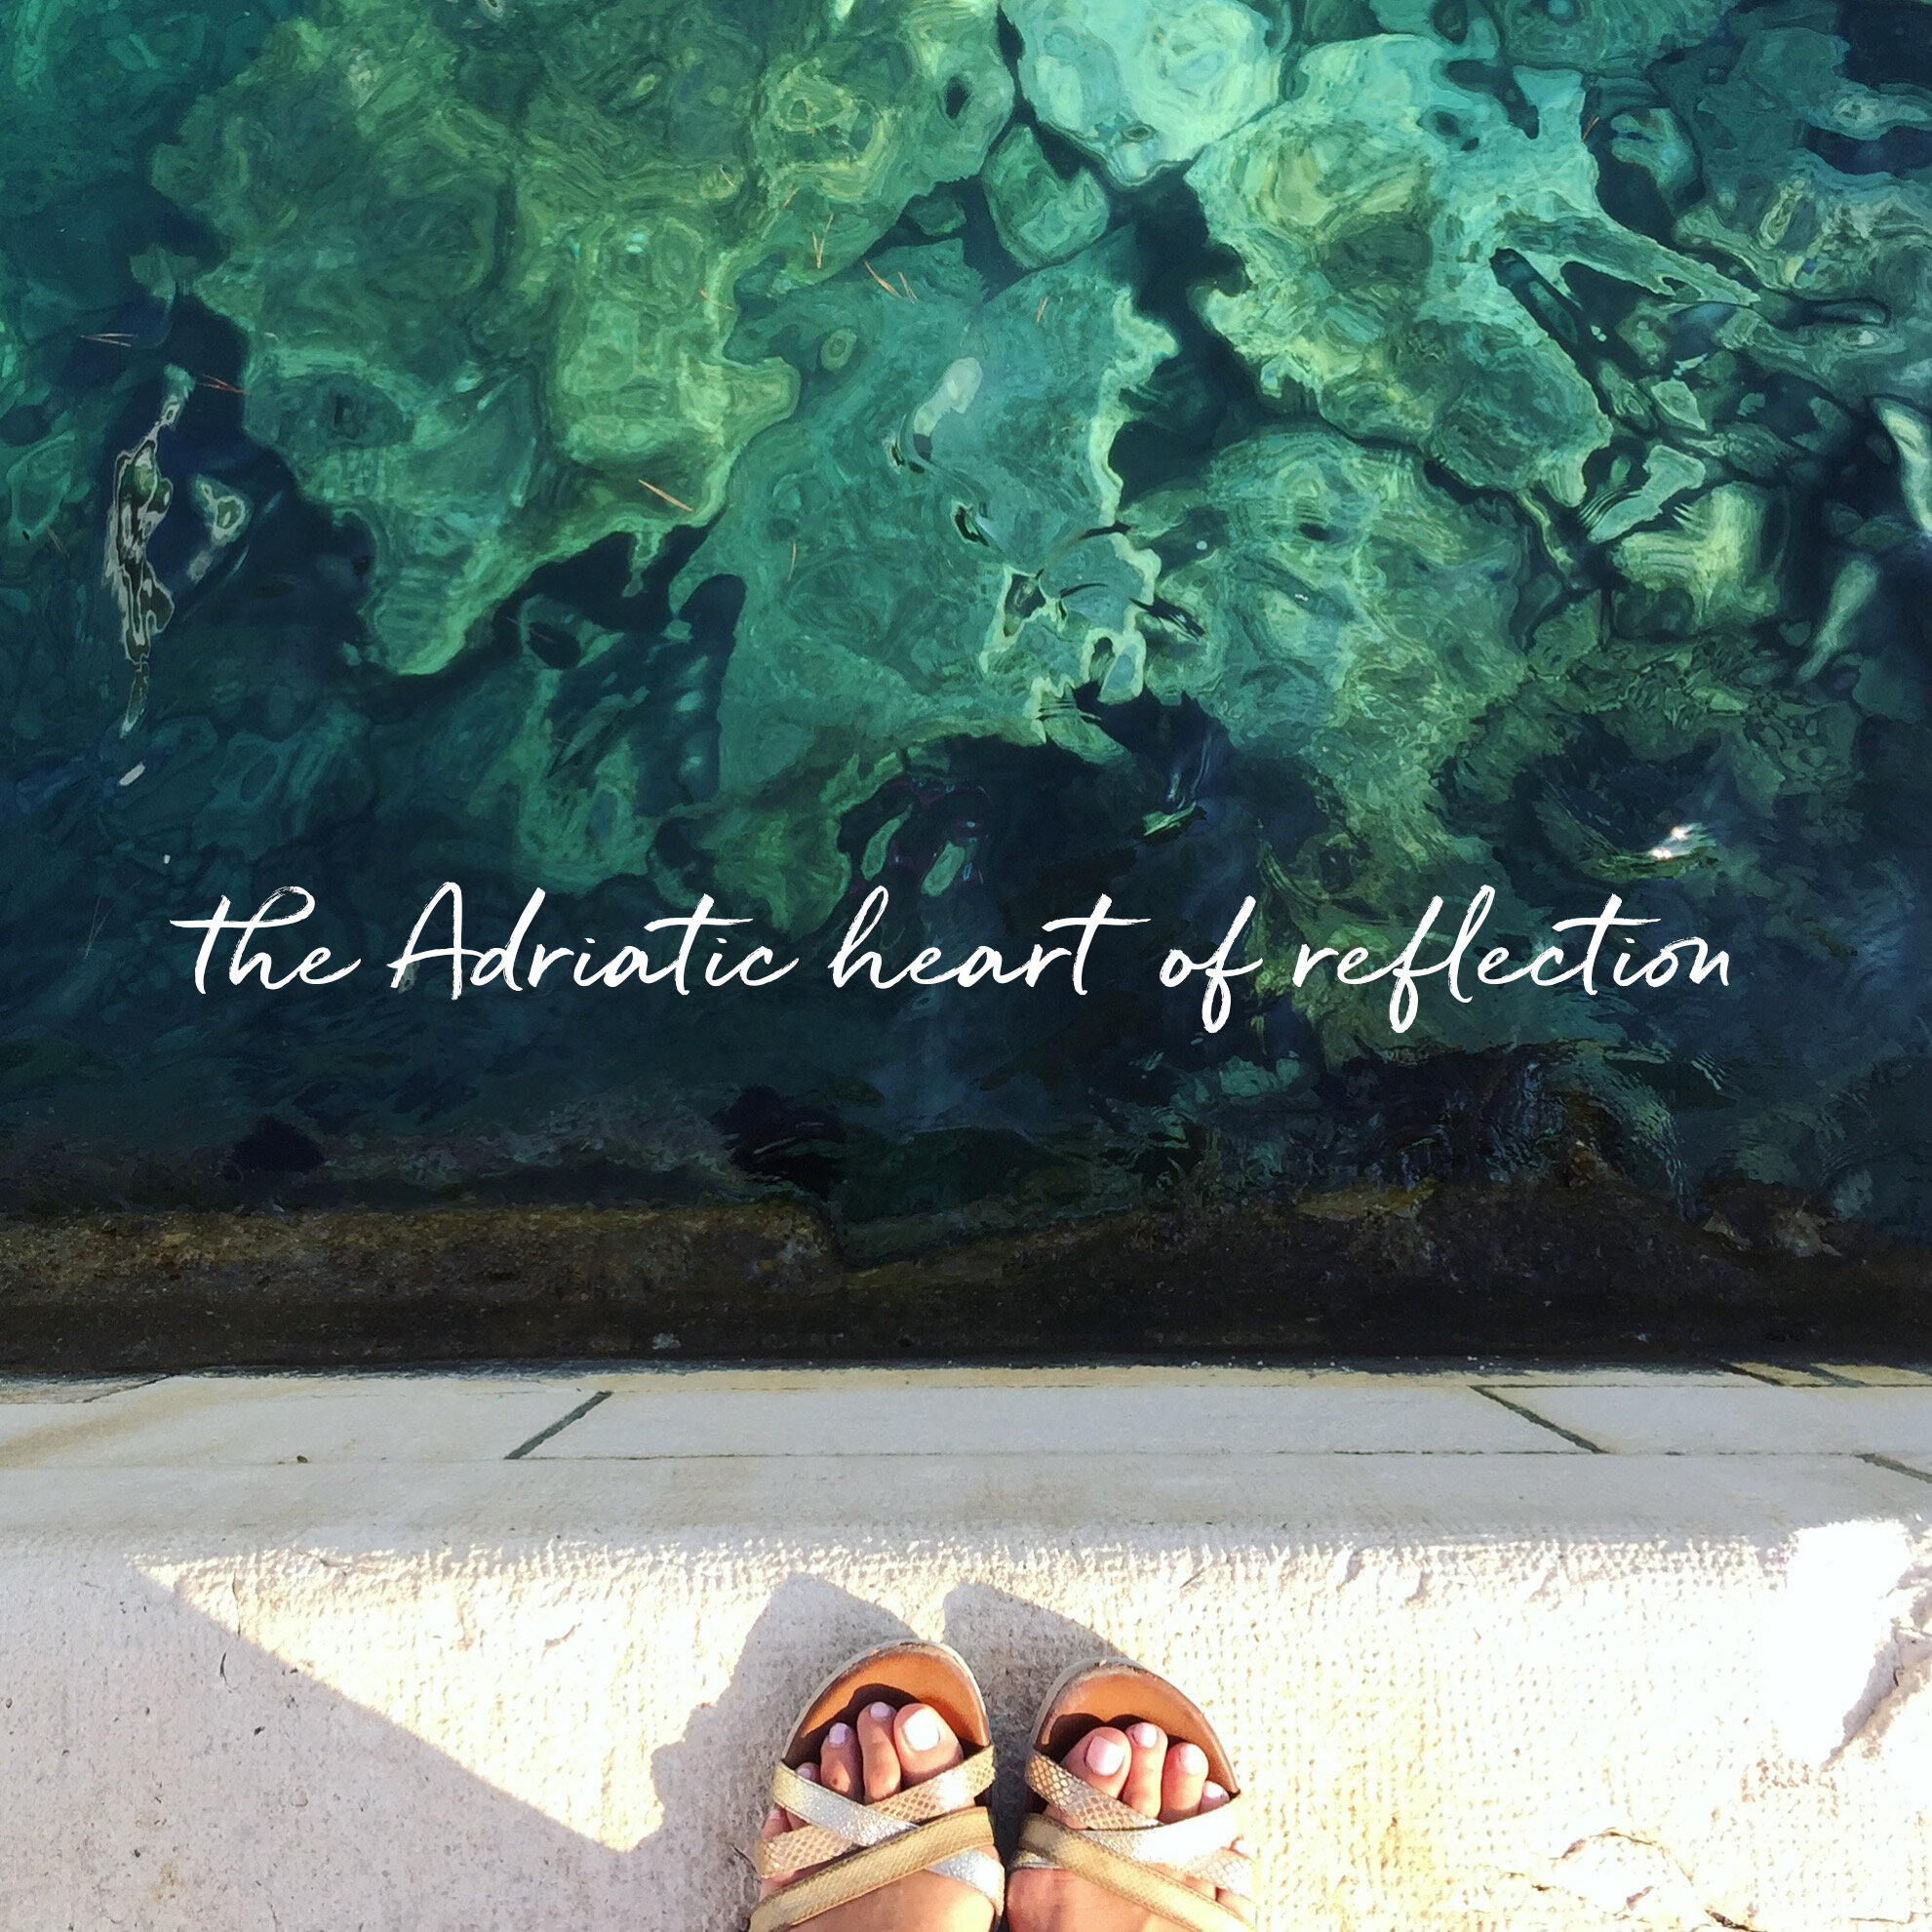 the Adriatic heart of reflection.jpg